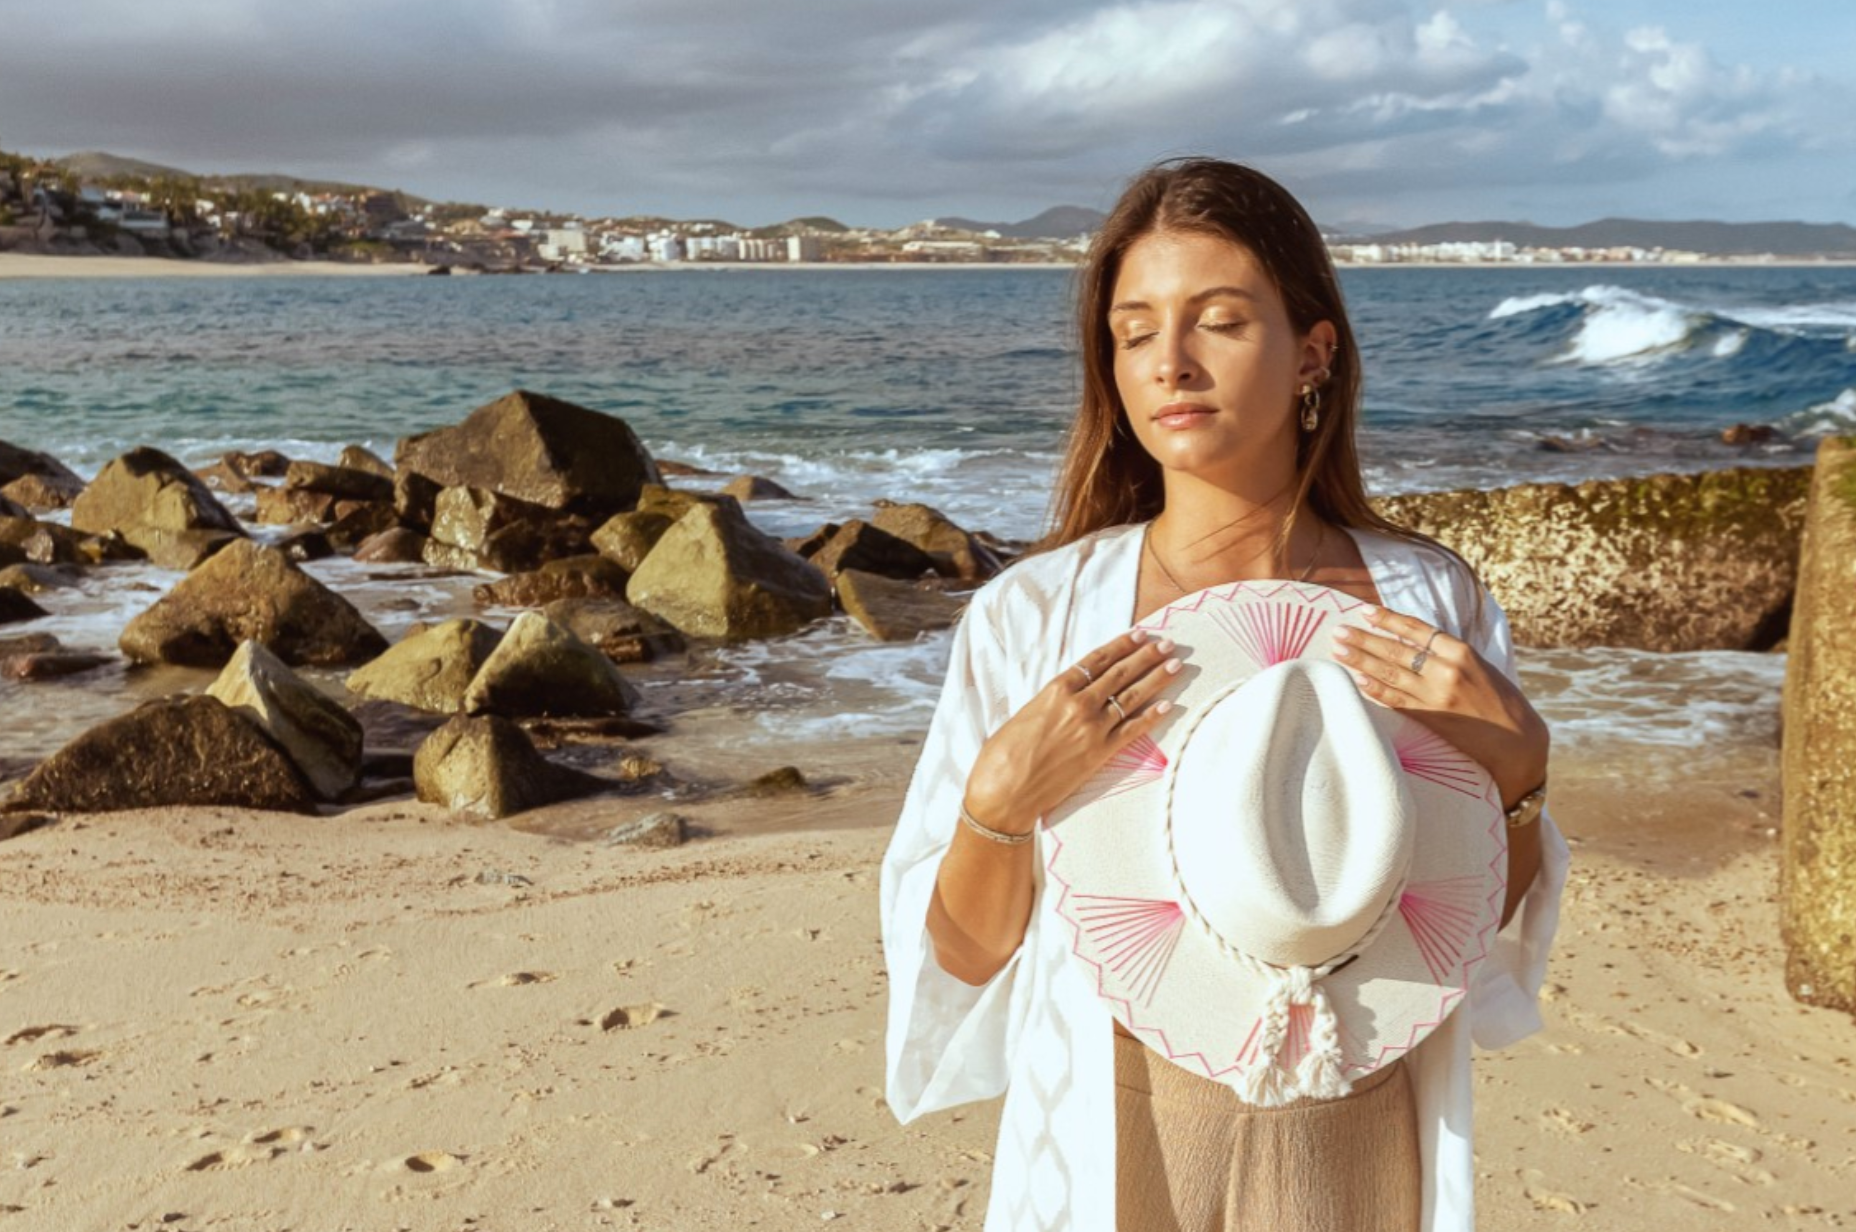 Exclusive Pink Sophie Hat by Corazon Playero - Preorder